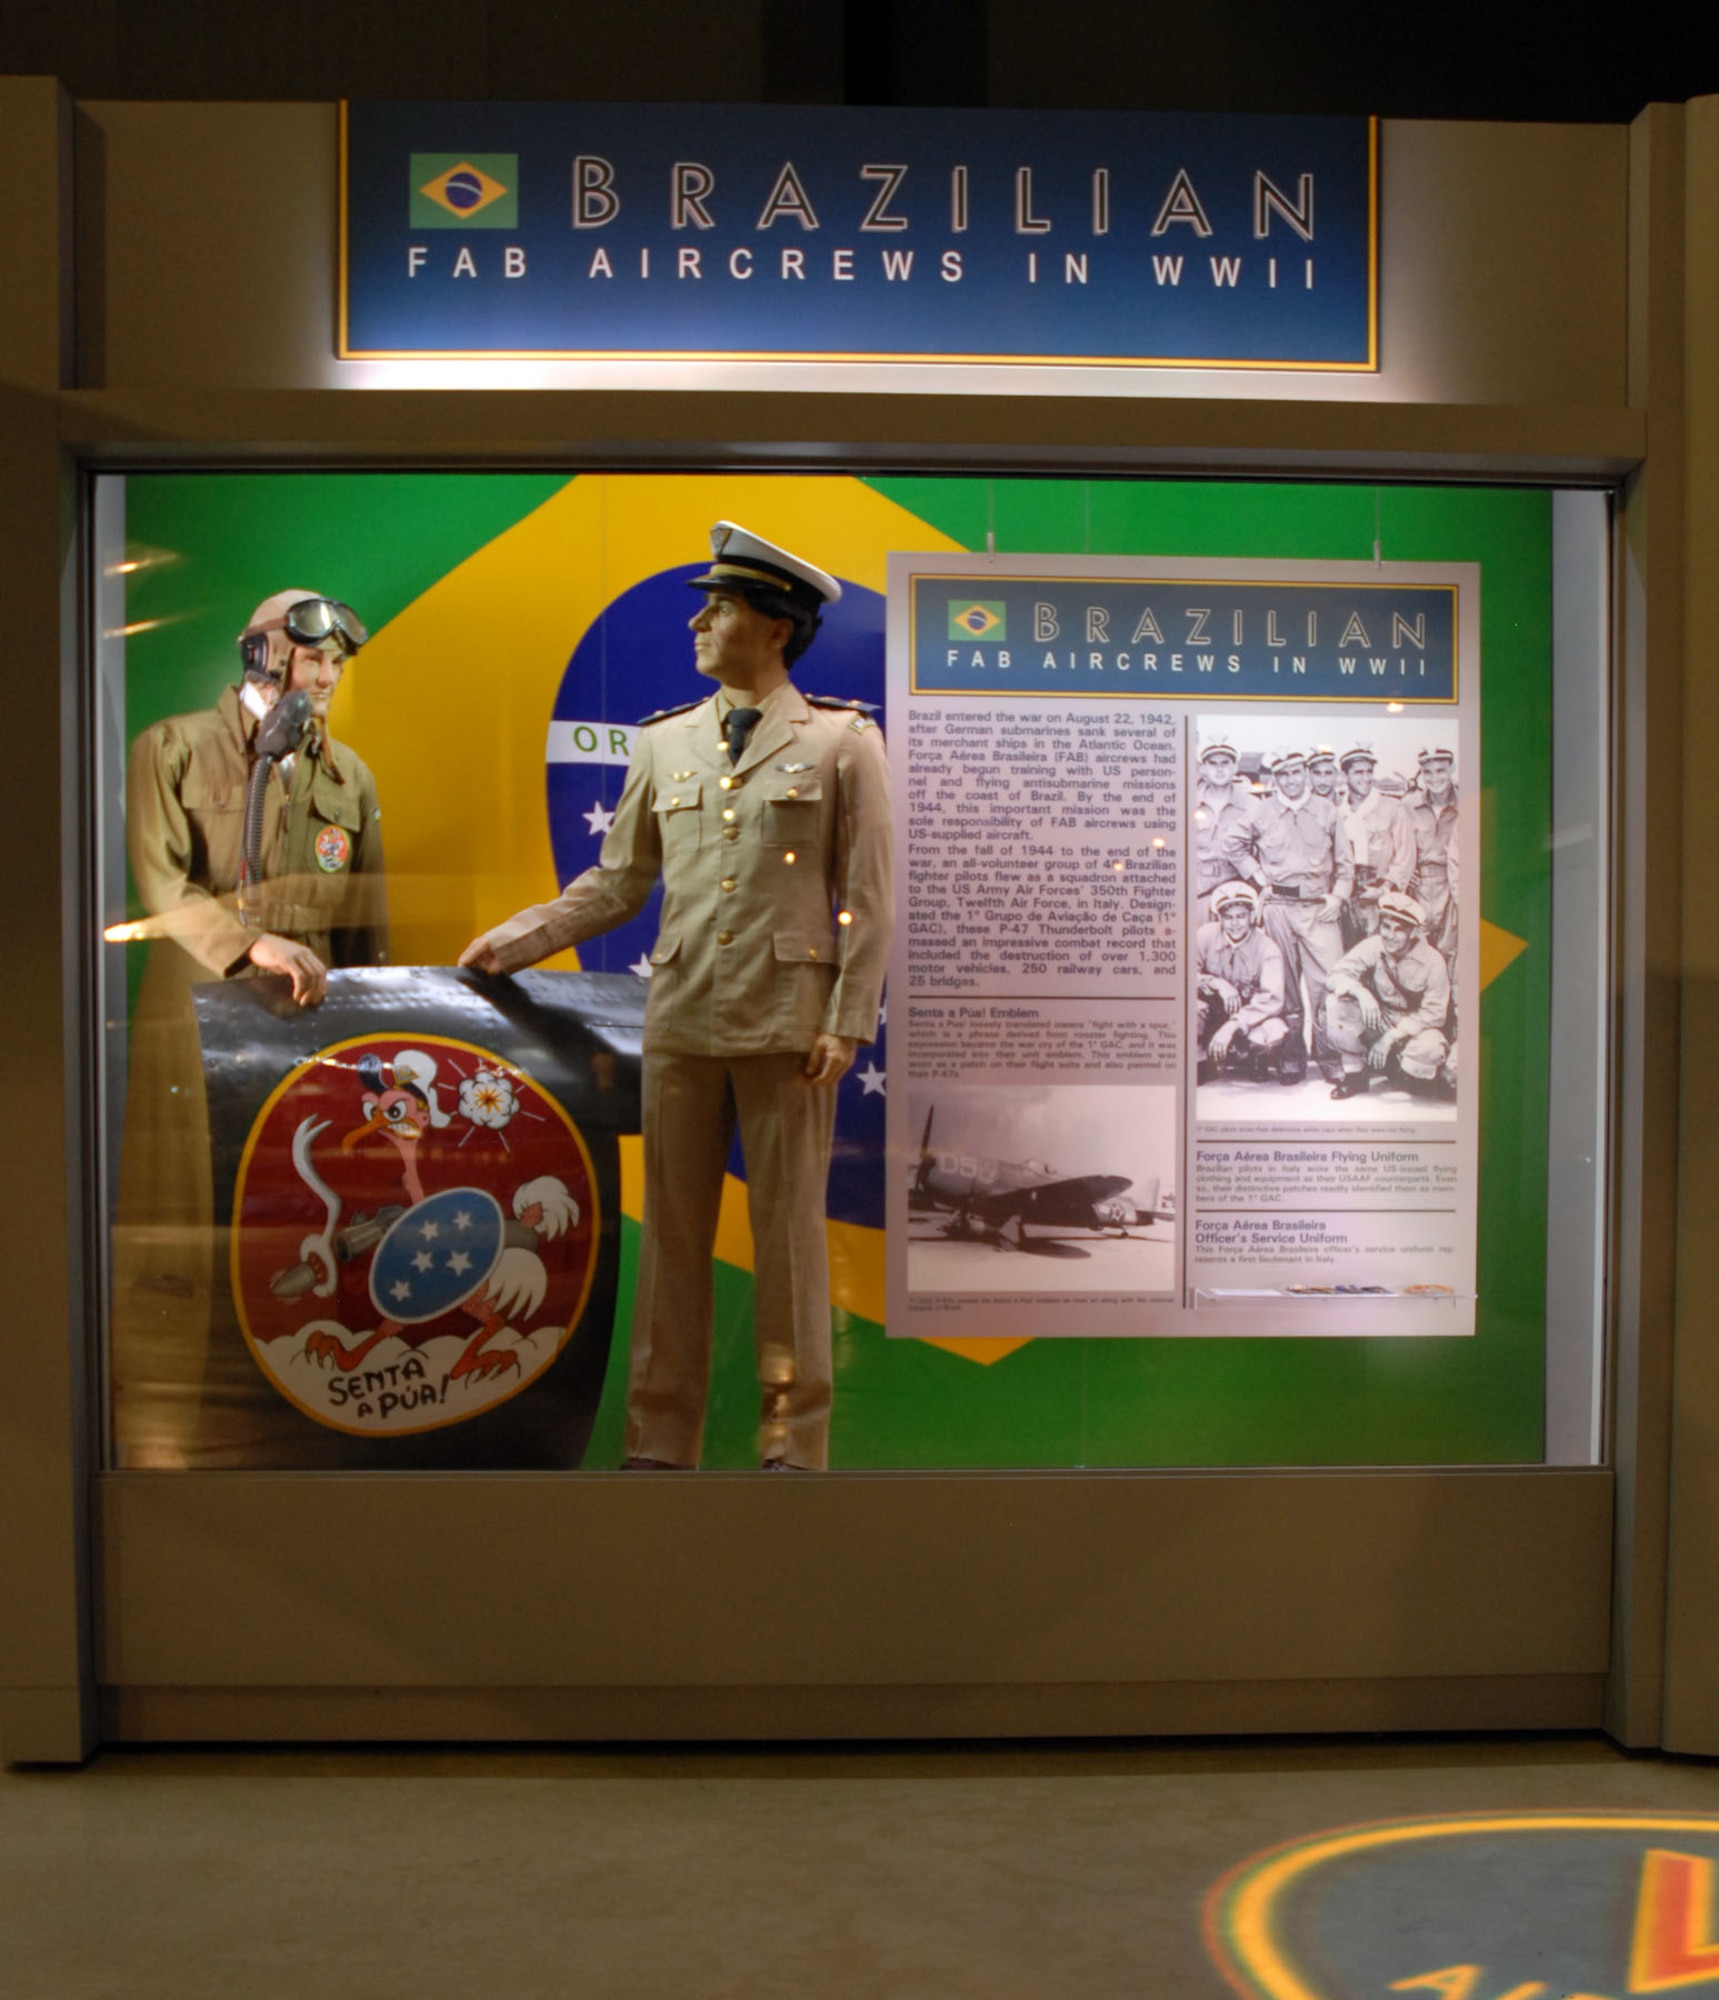 DAYTON, Ohio - The Brazilian FAB aircrews portion of the WWII: Airmen in a World at War exhibit in the World War II Gallery at the National Museum of the U.S. Air Force. (U.S. Air Force photo)